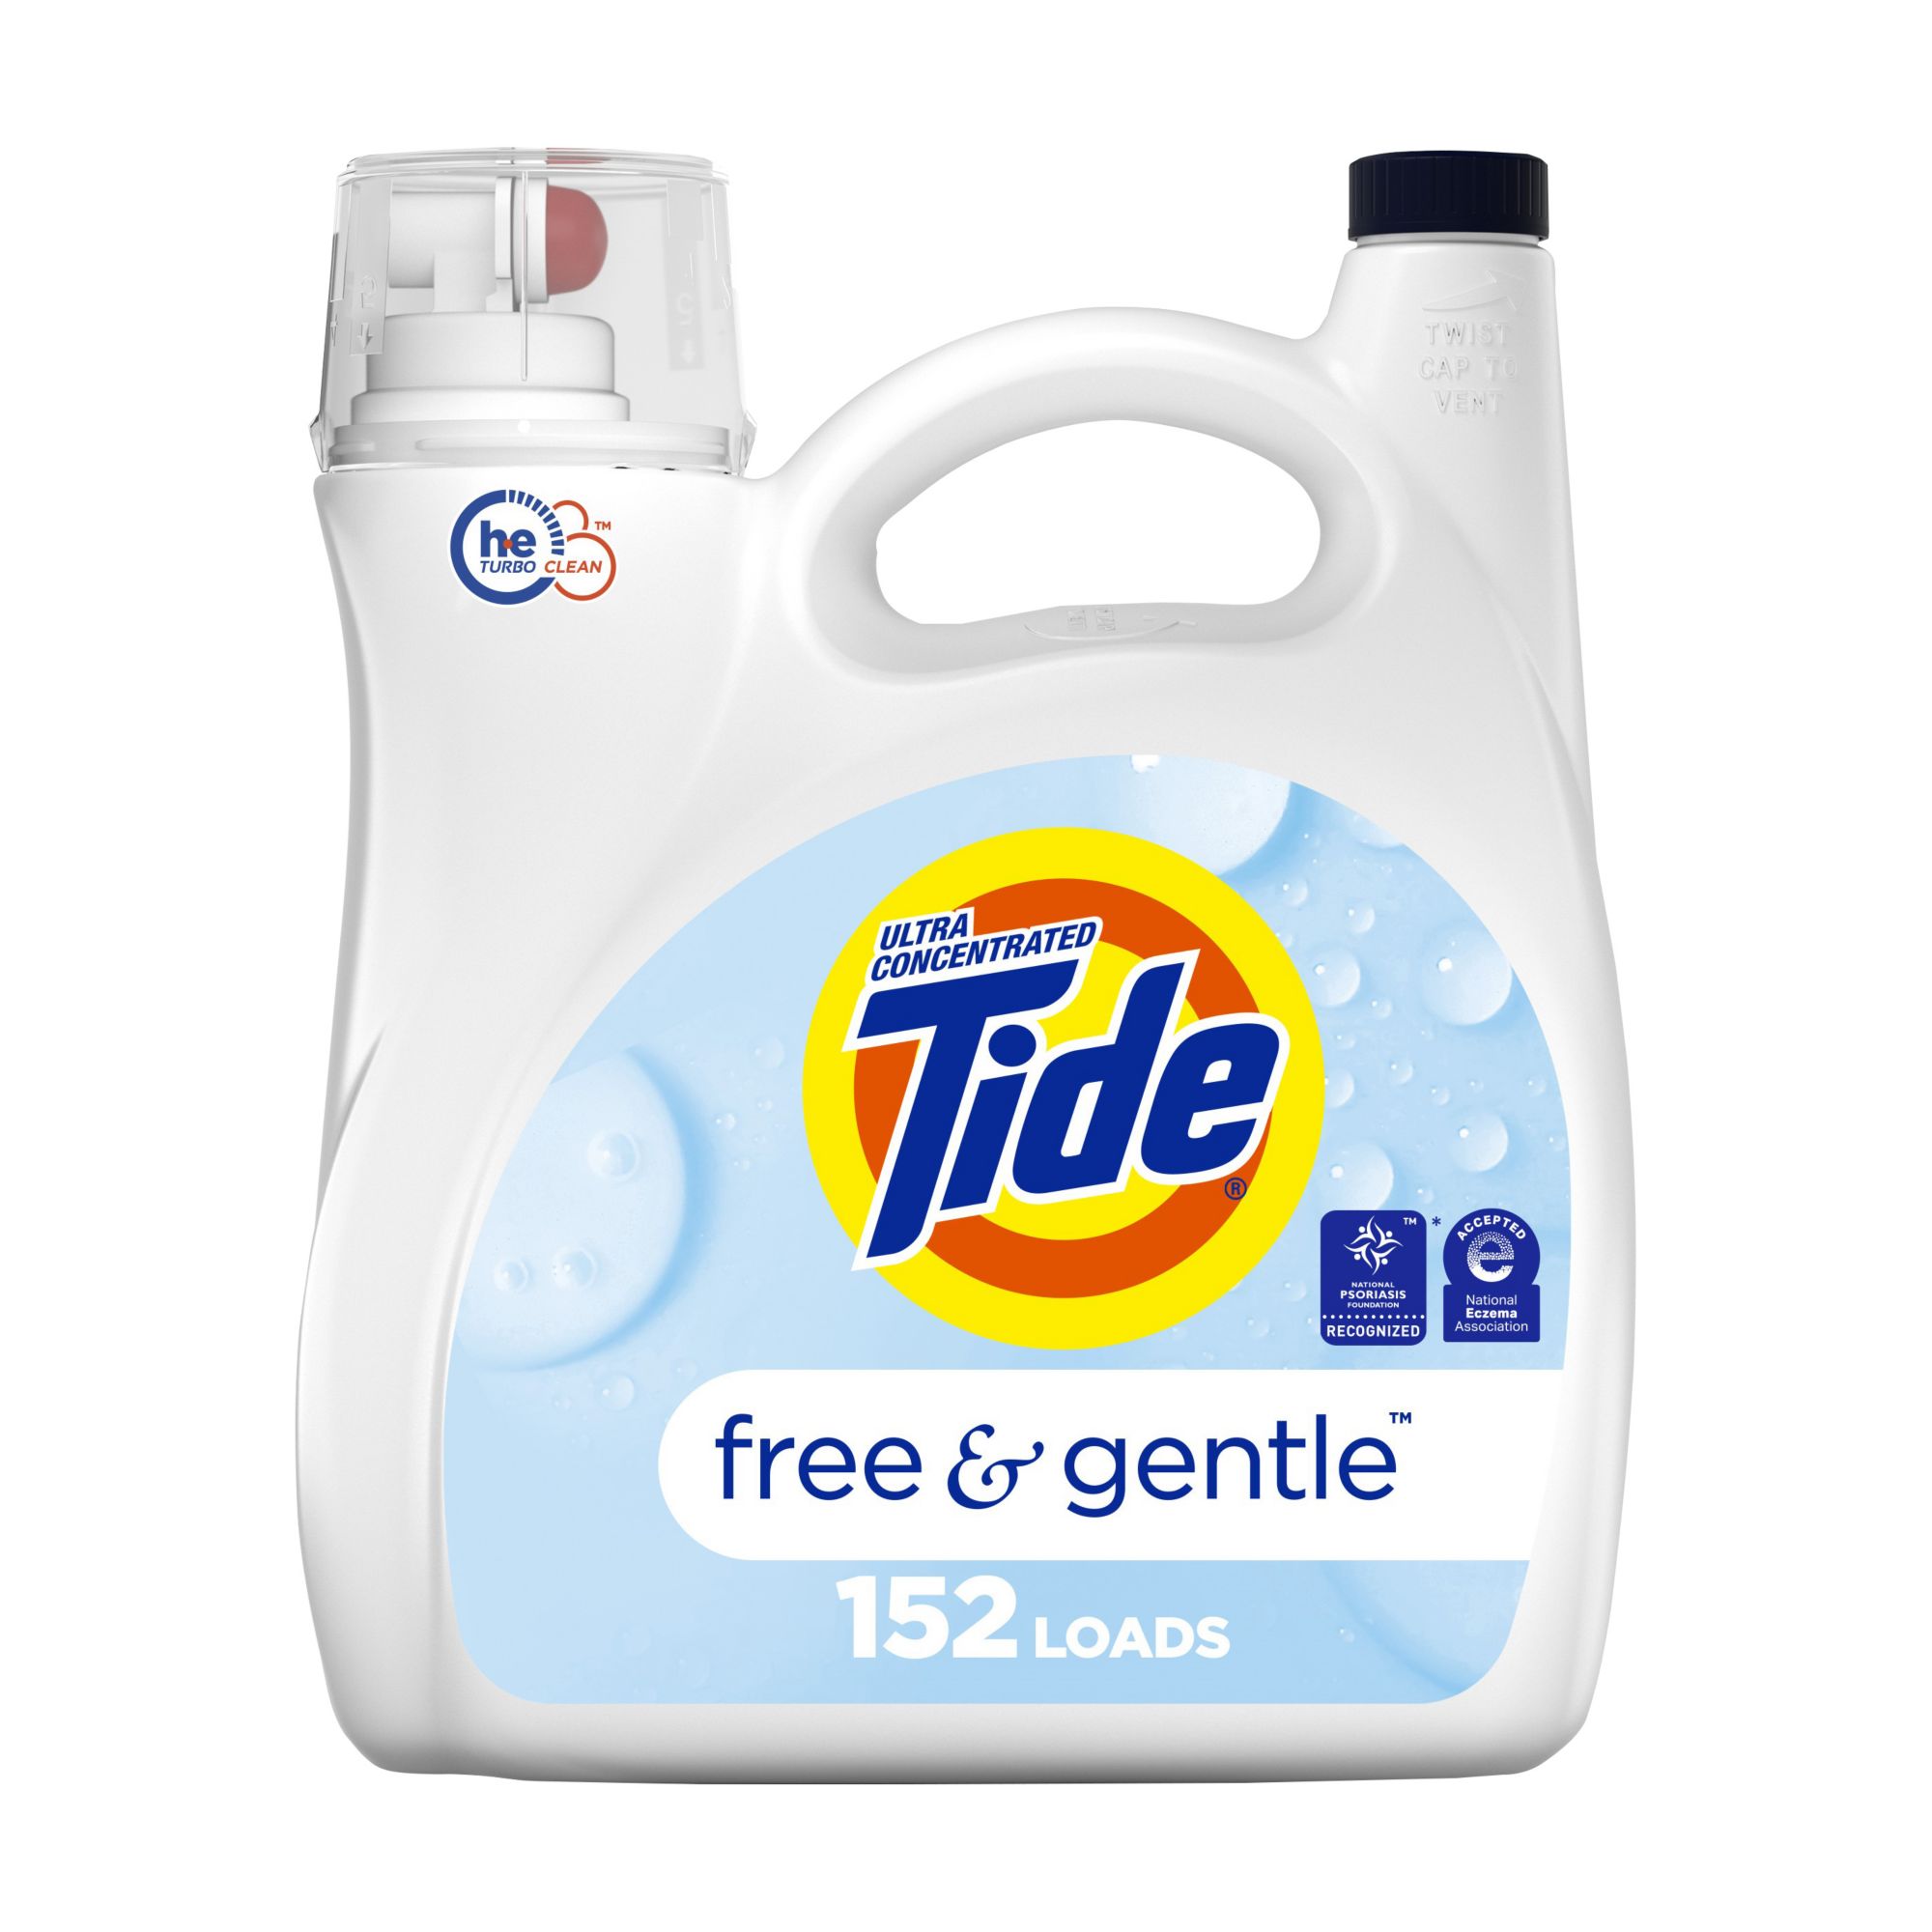 Tide Ultra Concentrated with Downy HE Liquid Laundry Detergent